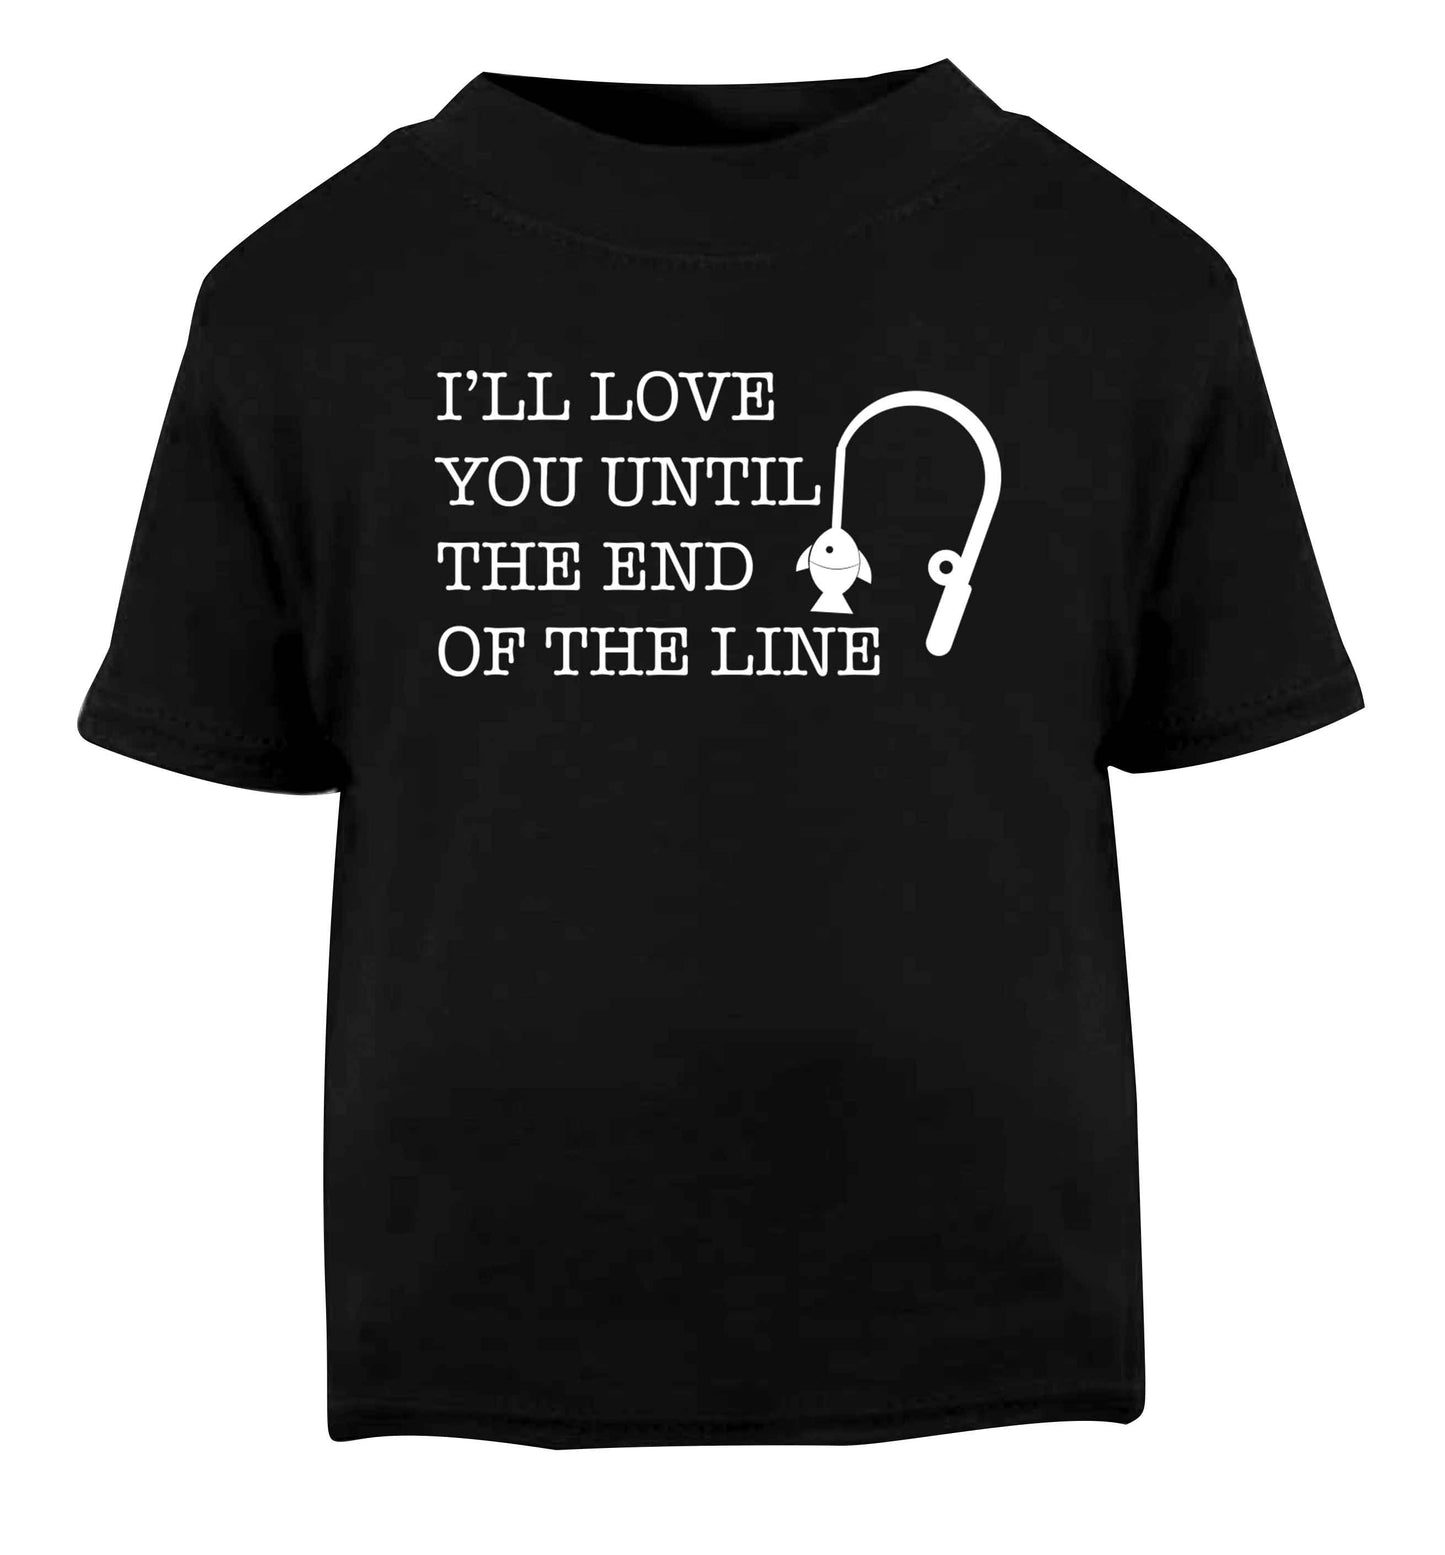 I'll love you until the end of the line Black Baby Toddler Tshirt 2 years